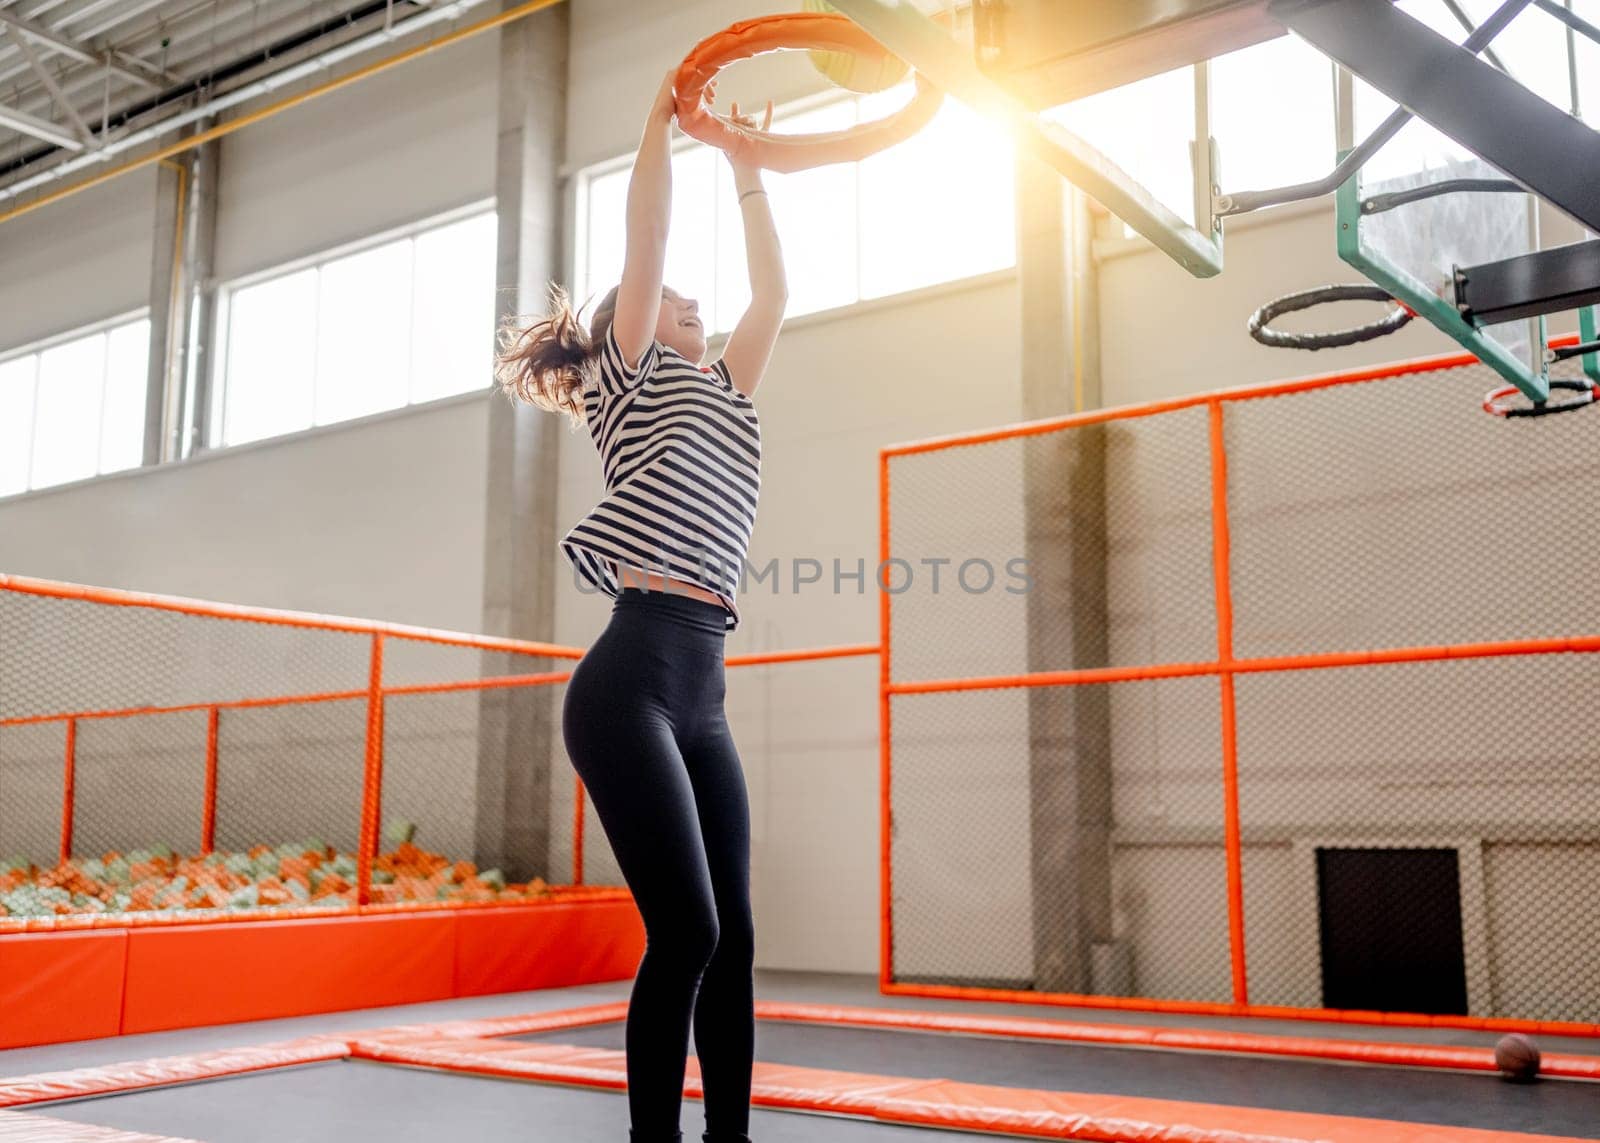 Pretty girl in trampoline park jumping and holding basketball basket. Happy teenager enjoying amusement activities